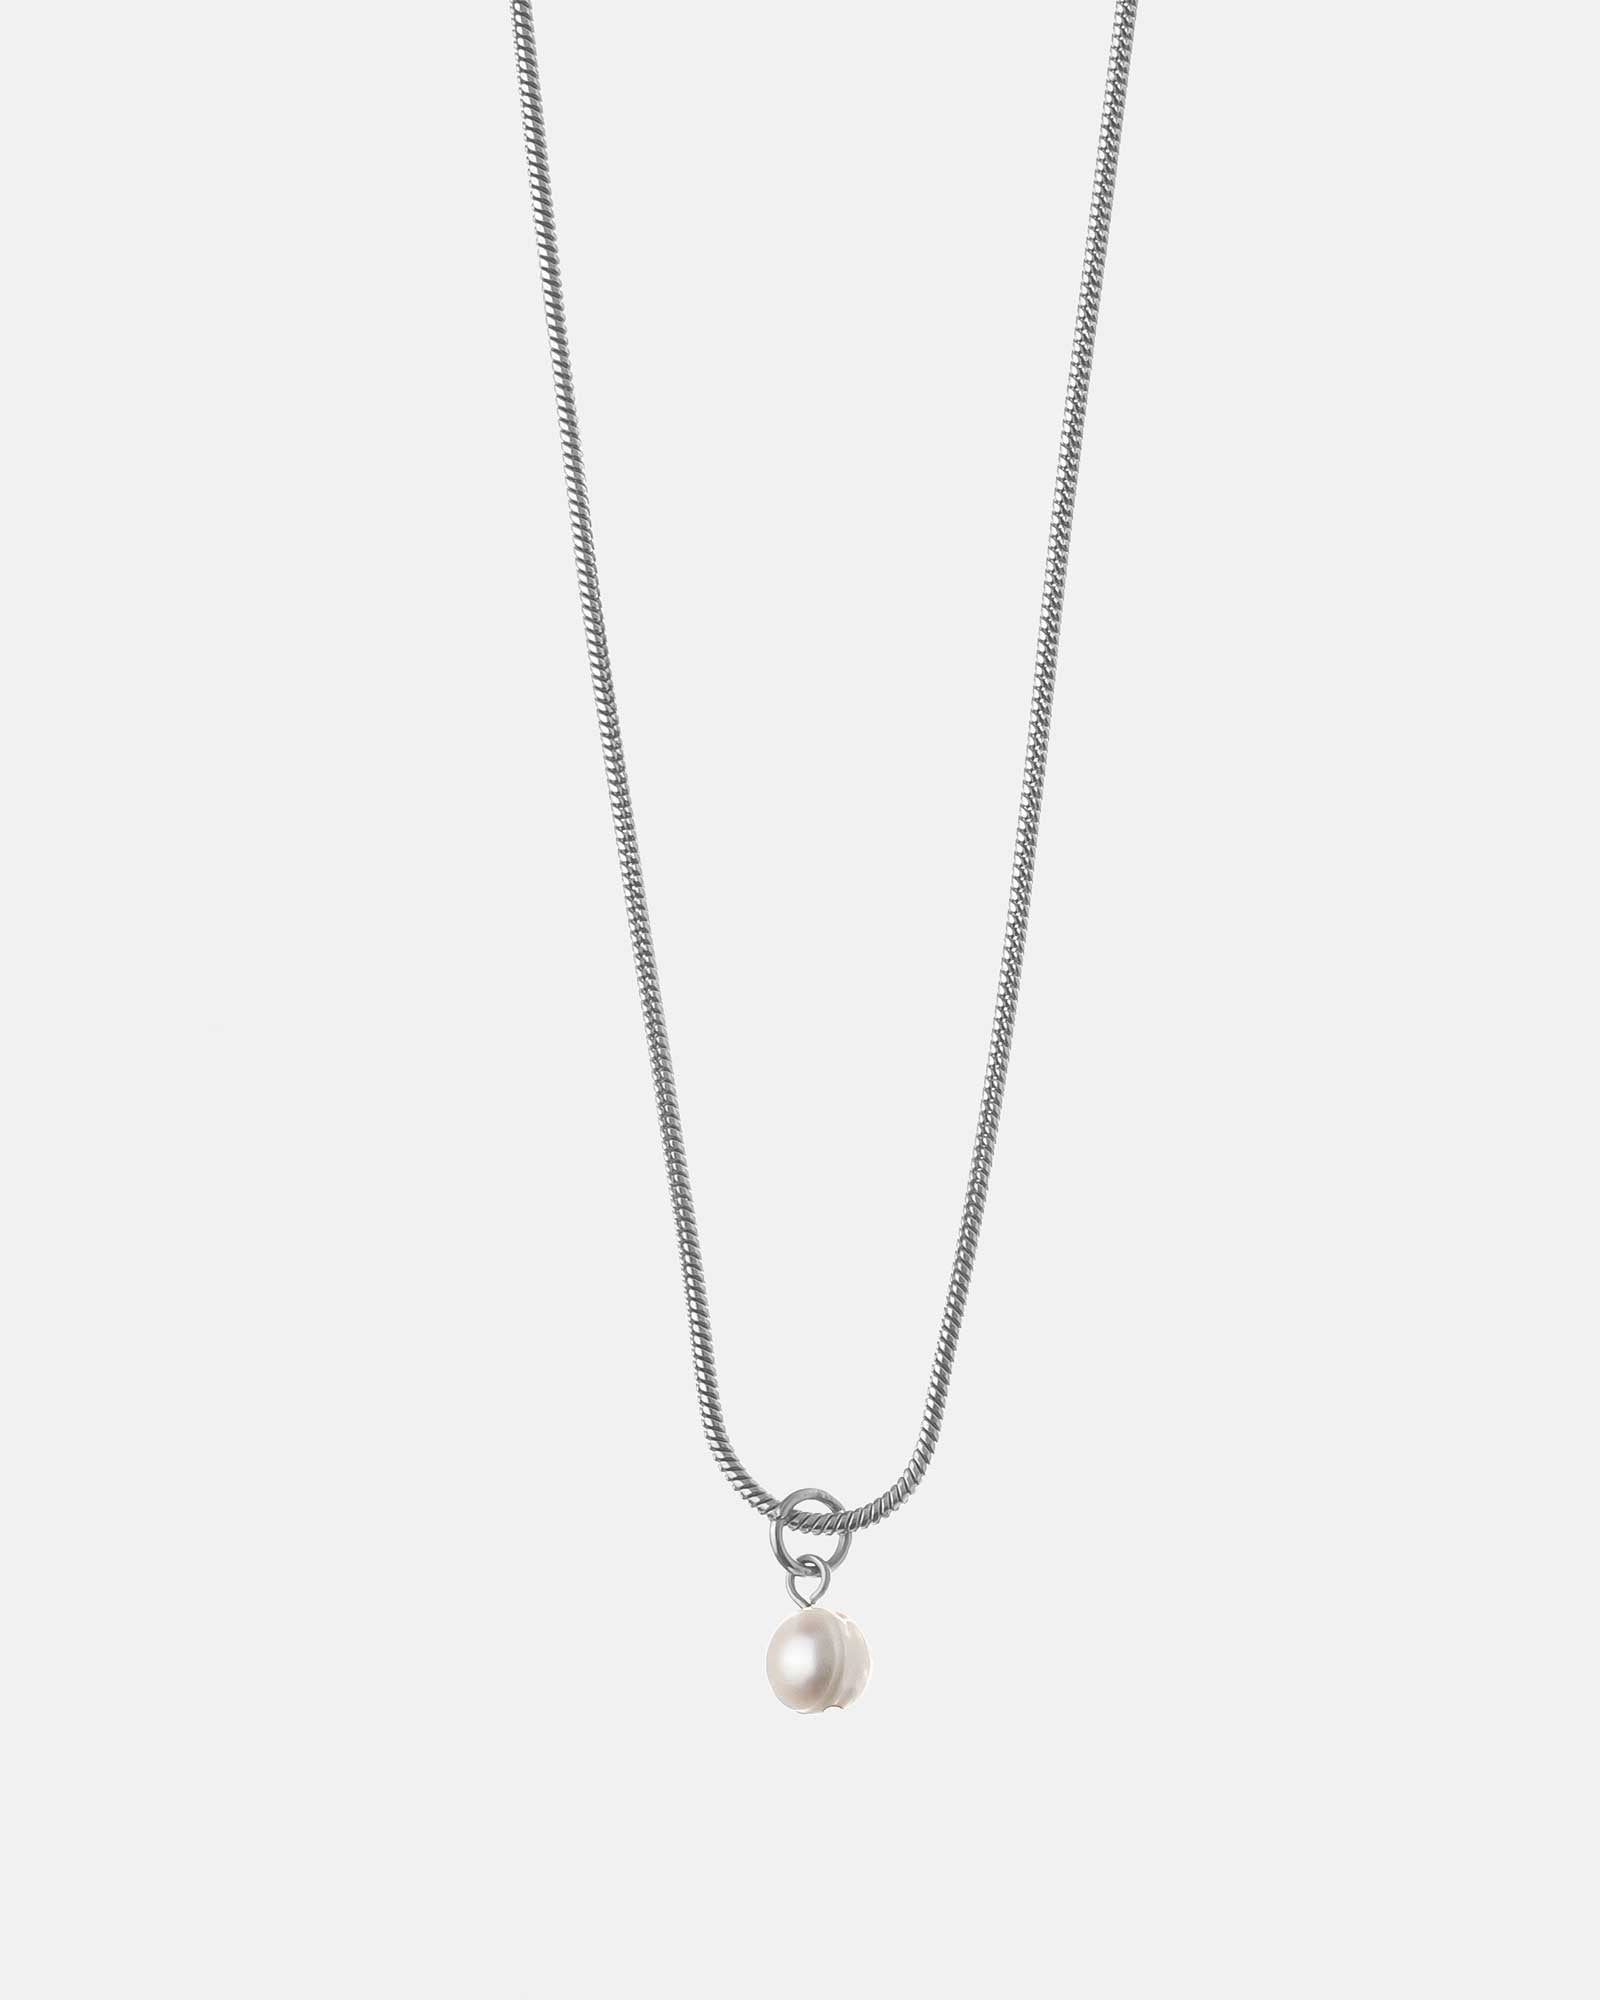 Stainless steel necklace with one pearl drop - Necklaces and Pendants - Online Unissex Jewelry - Dicci